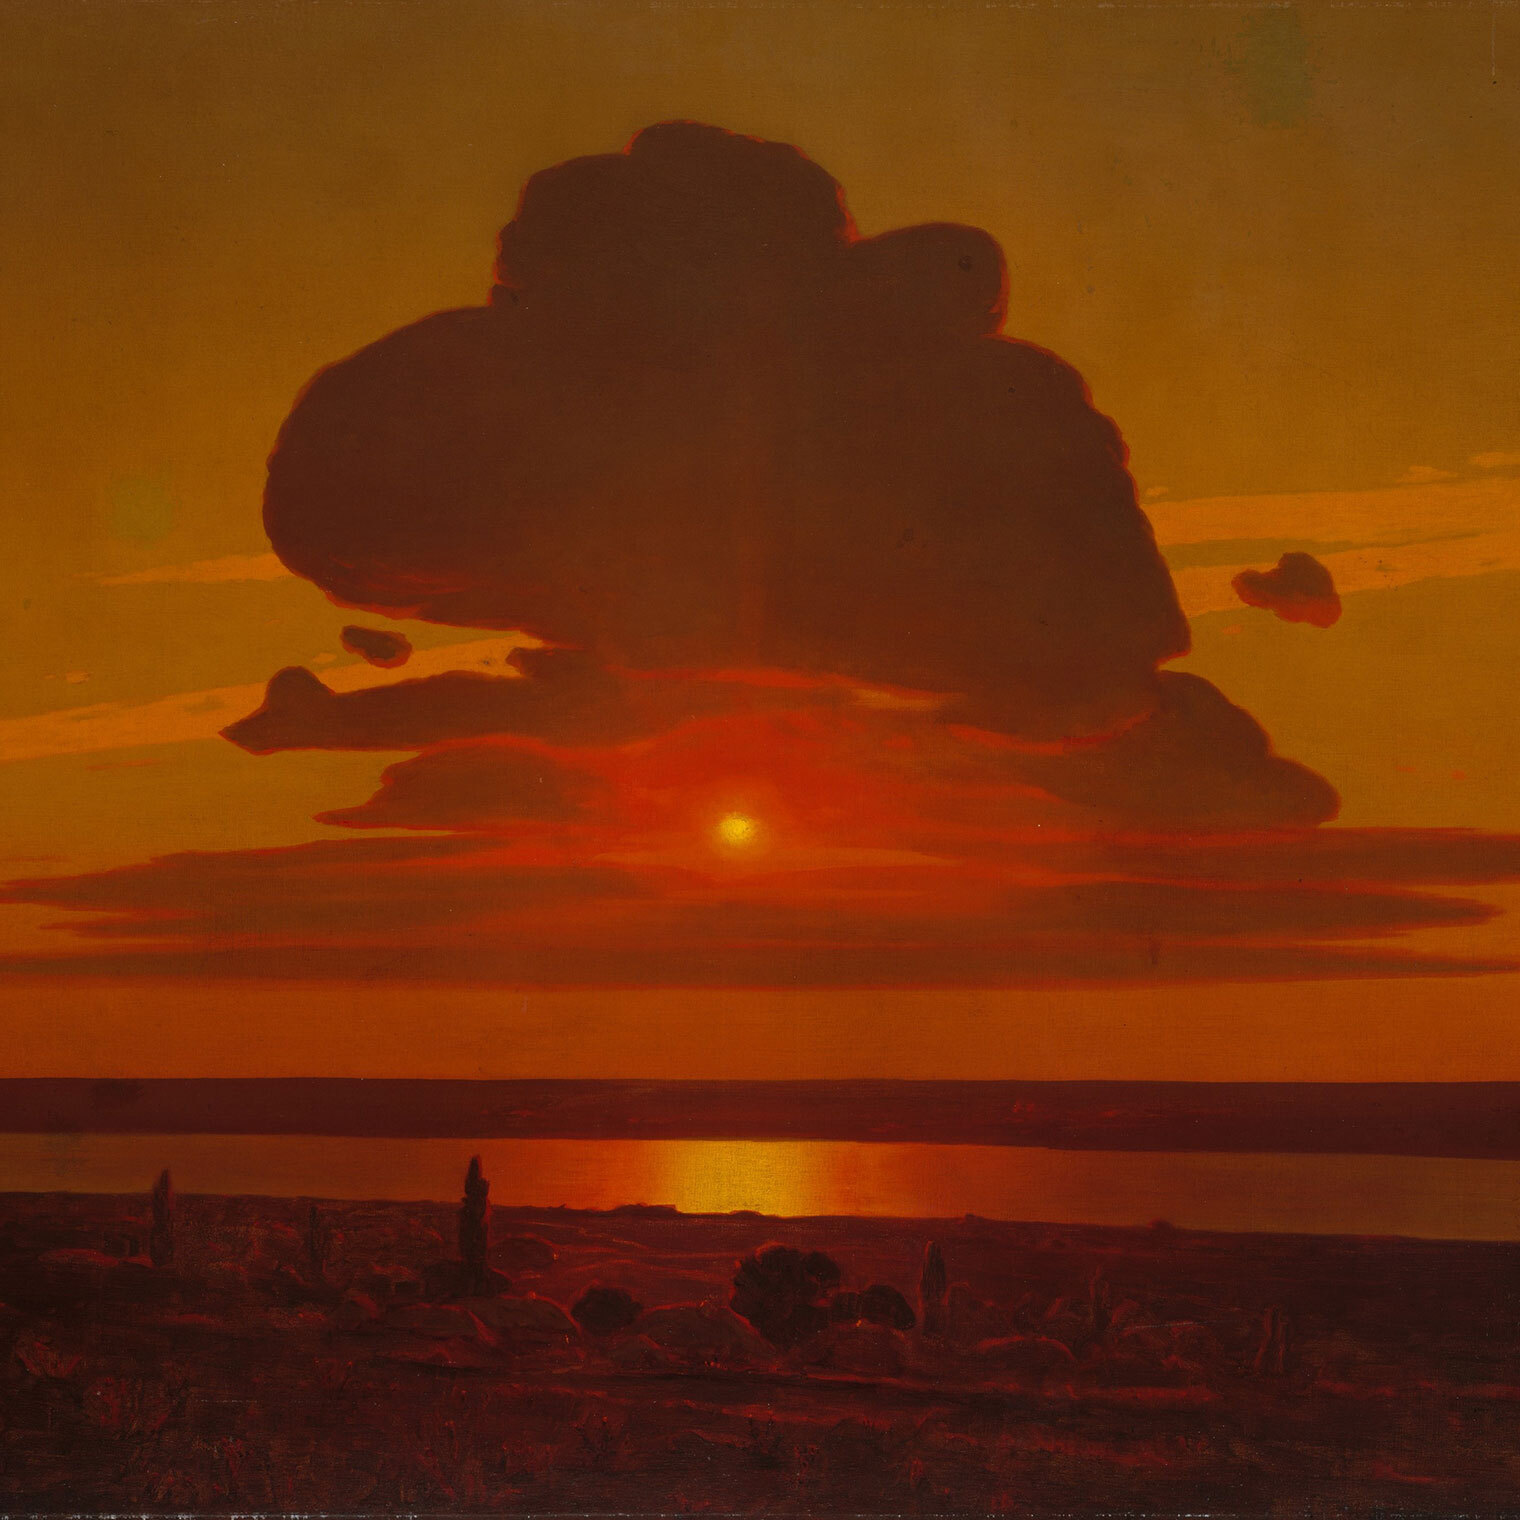 Red-hued photograph of a beach, and dark clouds over a blazing orange-hued sunset in the horizon.